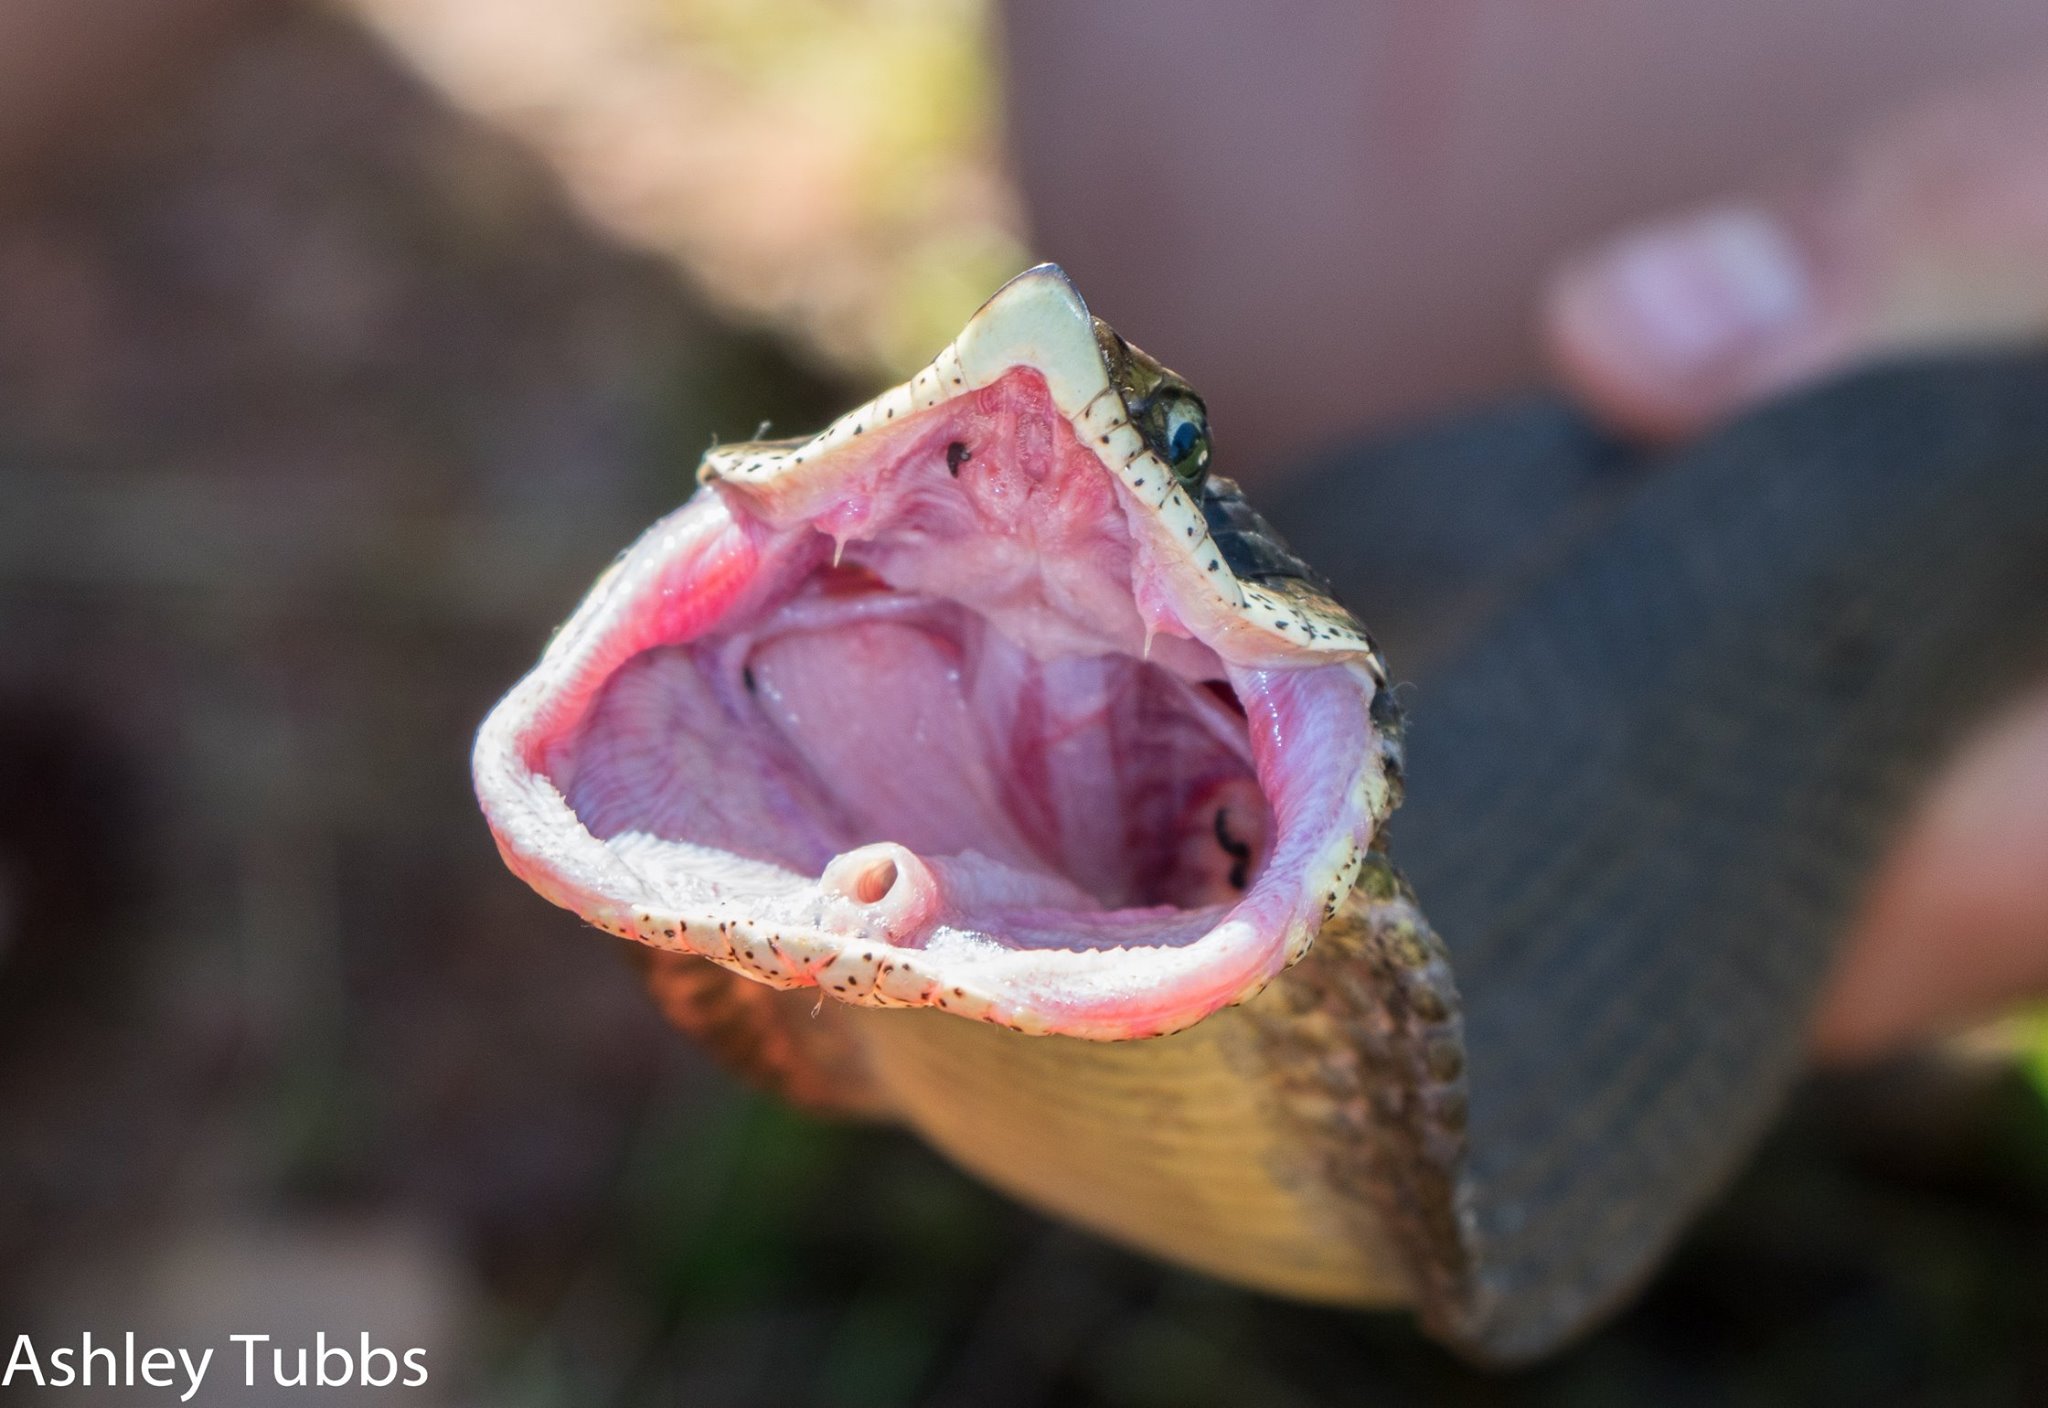 Eastern Hog-nosed Snake photo by Ashley Tubbs